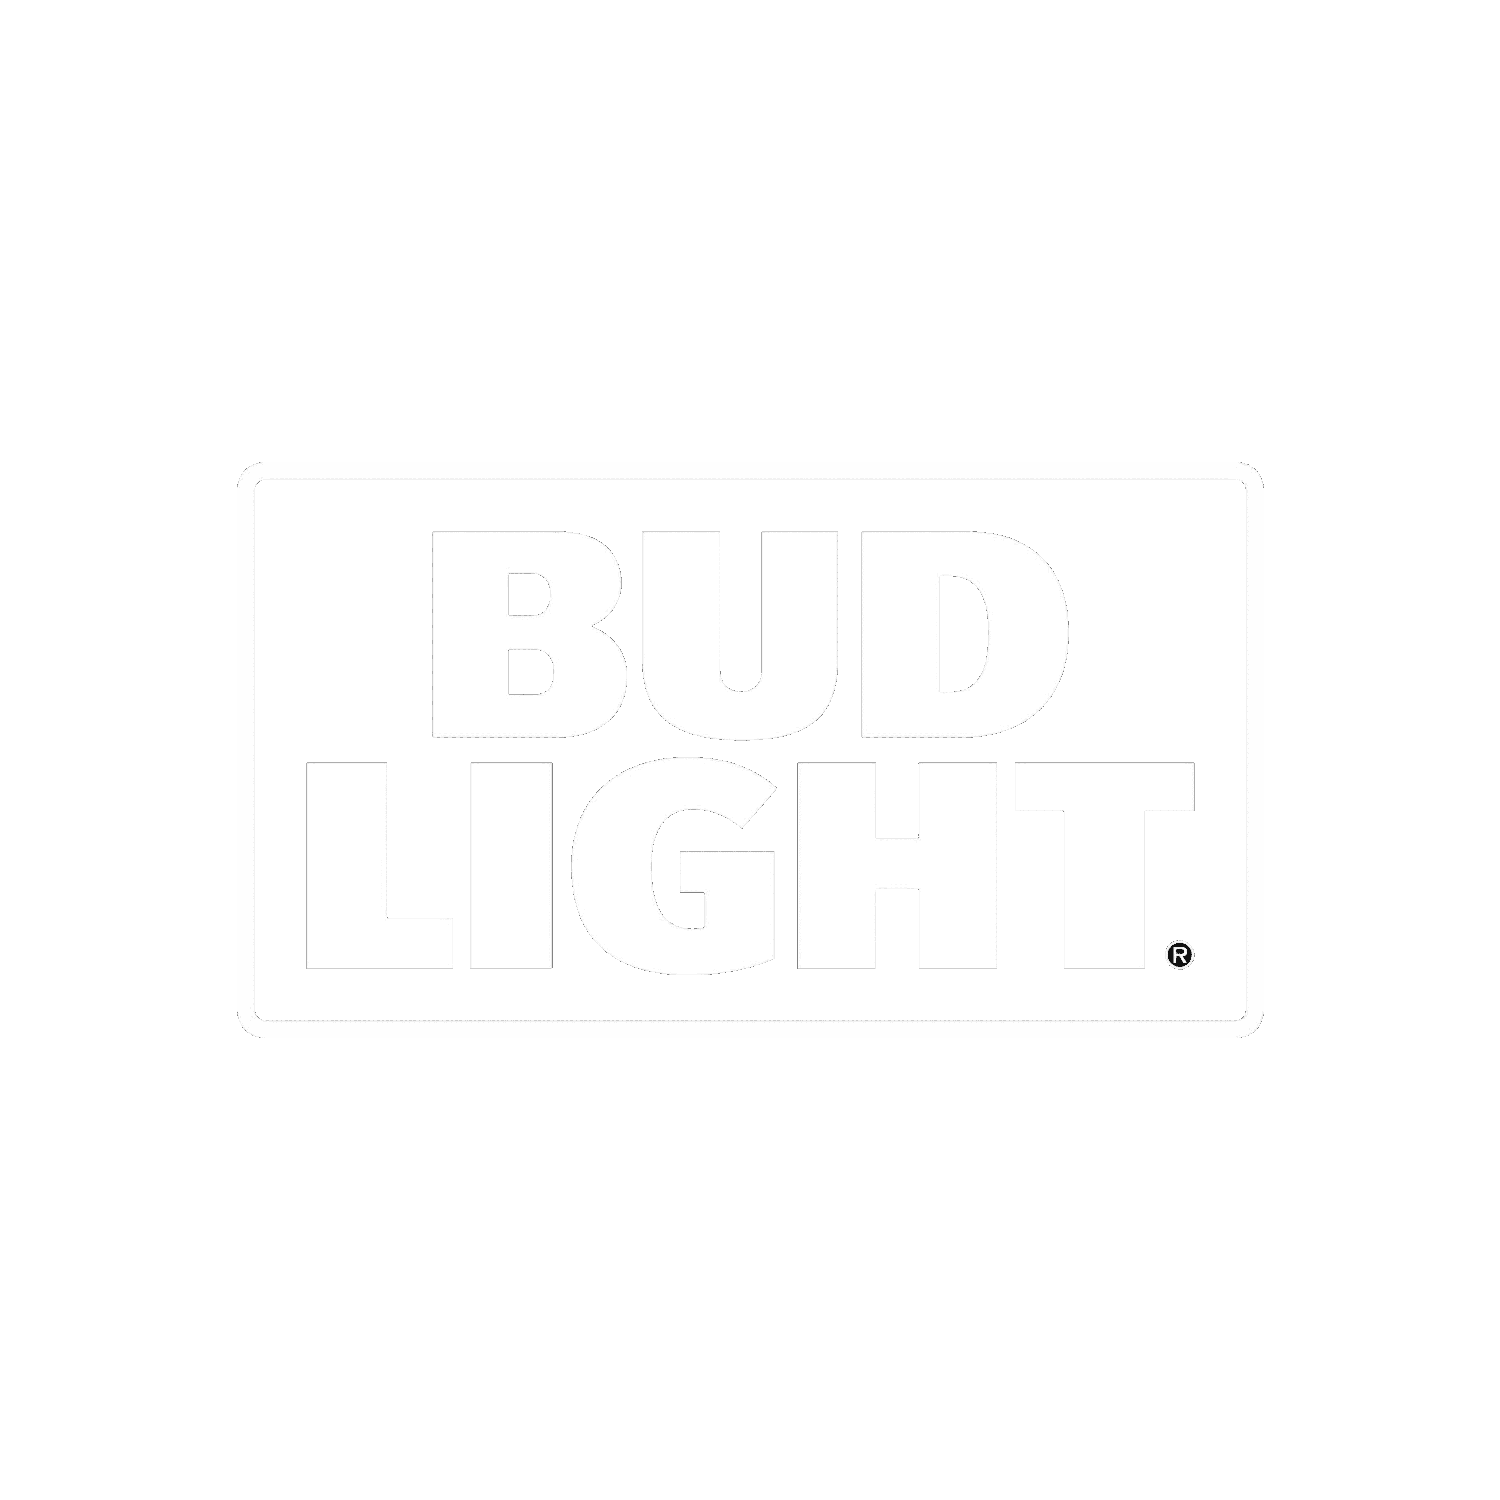 00__0021_BudLight.png